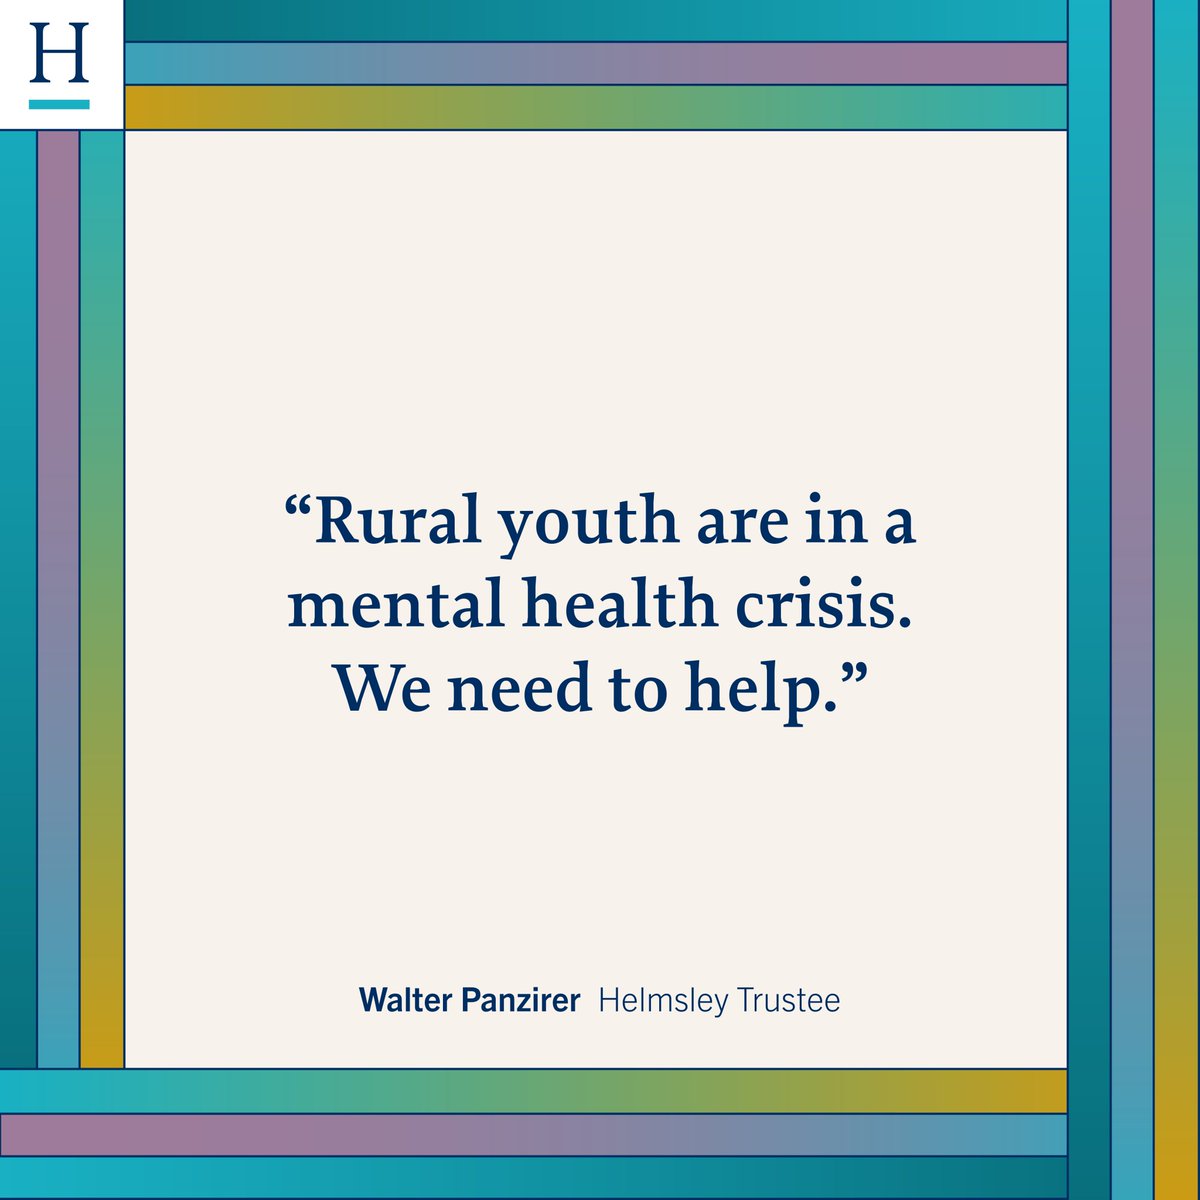 Increasing access to healthcare in rural America means investing in all aspects of health - including mental health care. “The first step is having a dialogue,” Helmsley Trustee Walter Panzirer said while participating on a panel of experts convened by @BPC_Bipartisan to…